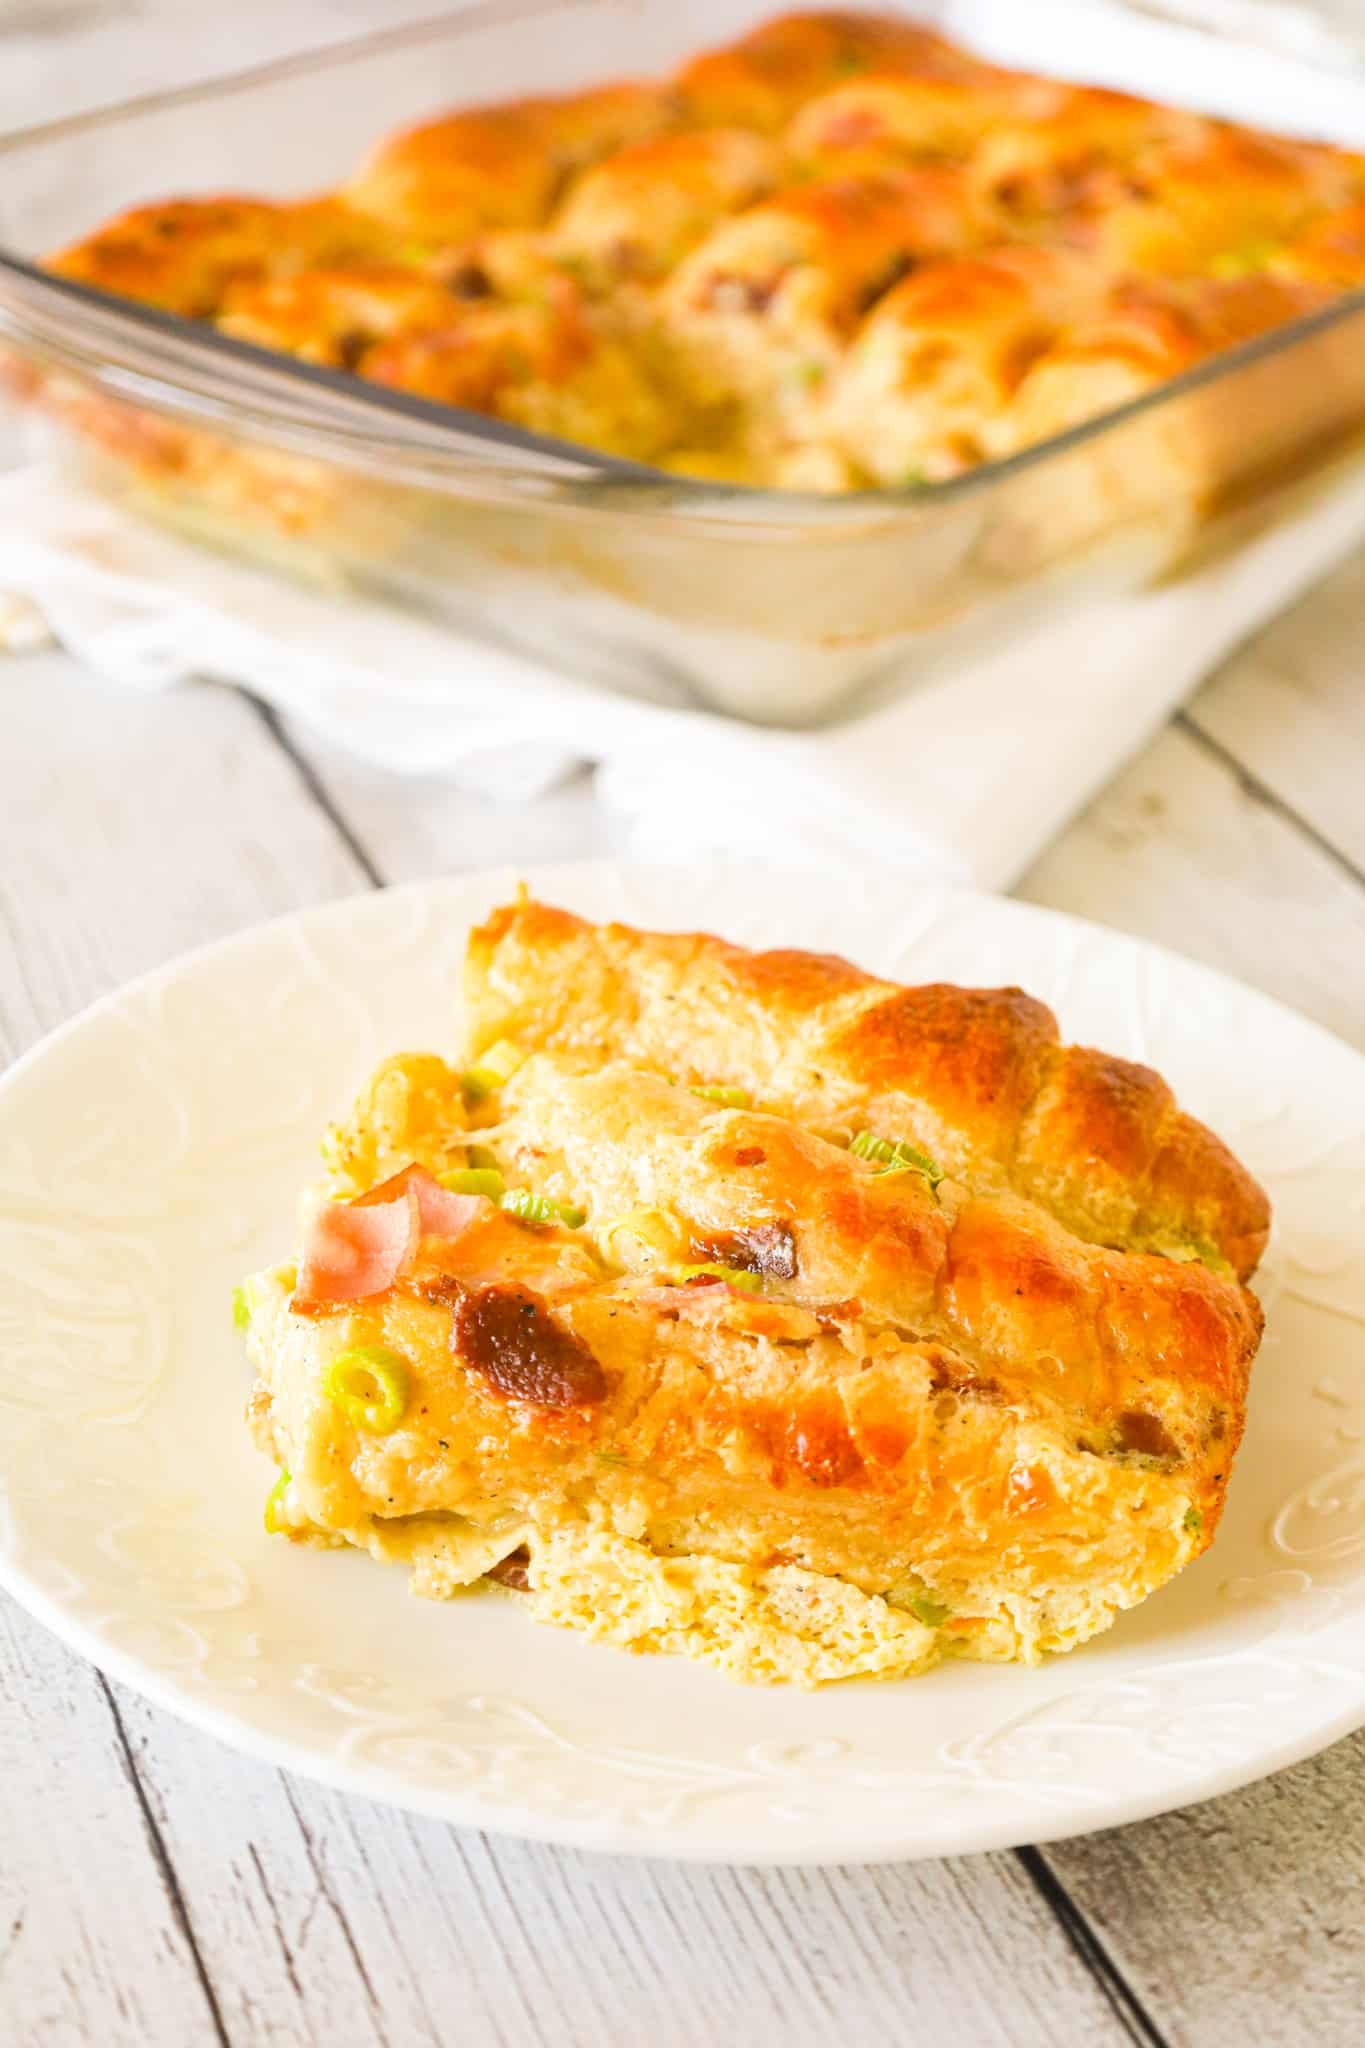 Crescent Roll Breakfast Casserole is a tasty egg casserole made with Pillsbury crescent roll dough and loaded with crumbled bacon, chopped ham, green onions and shredded cheese.